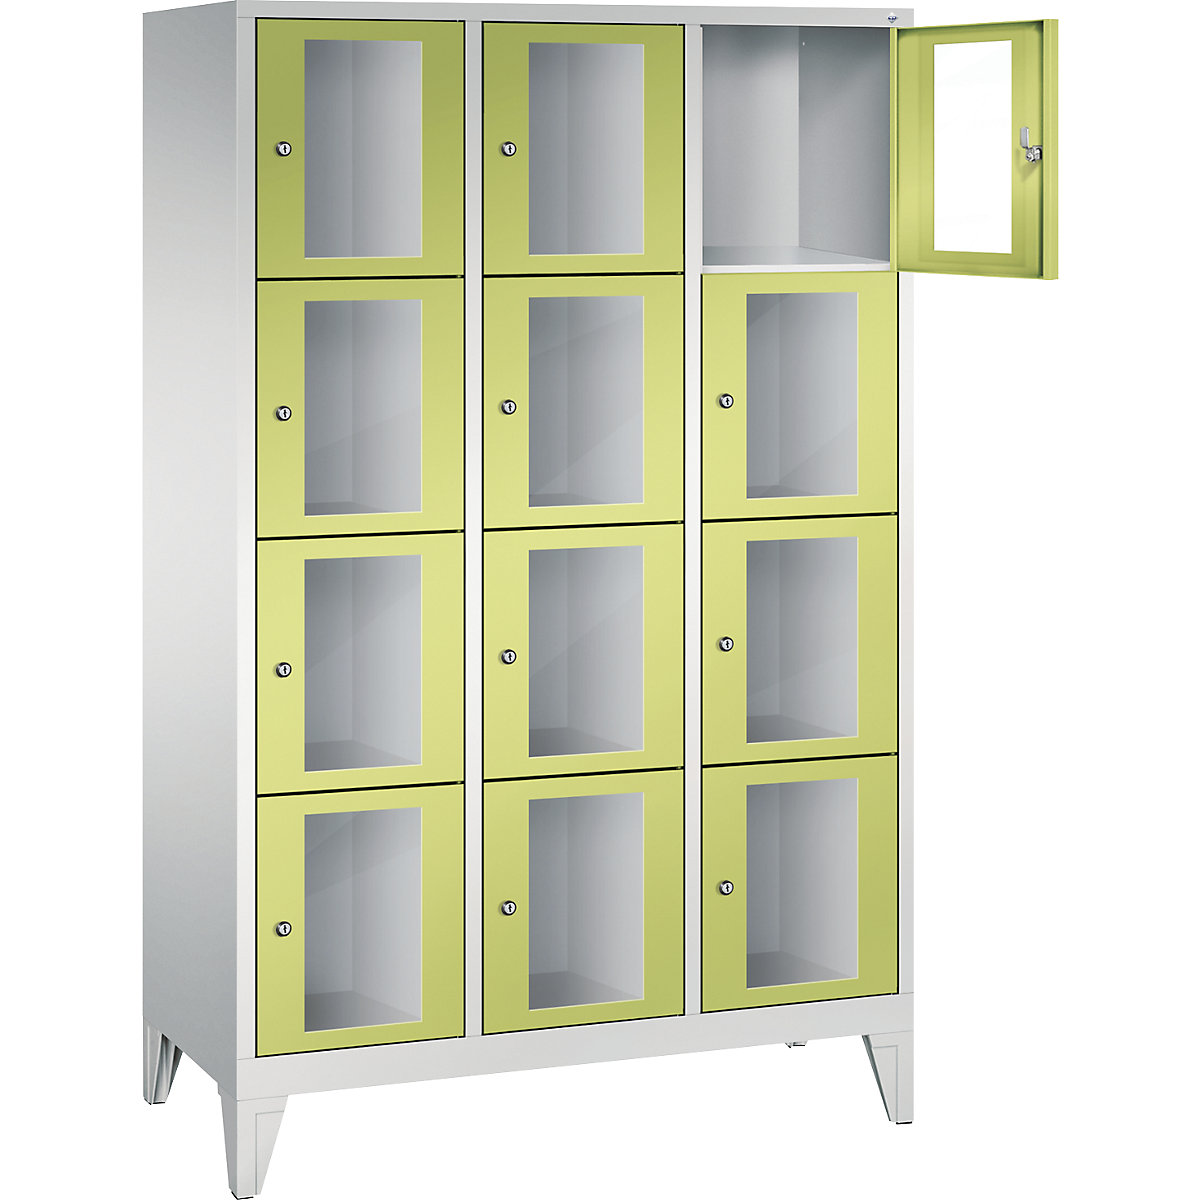 C+P – CLASSIC locker unit, compartment height 375 mm, with feet, 12 compartments, width 1200 mm, viridian green door